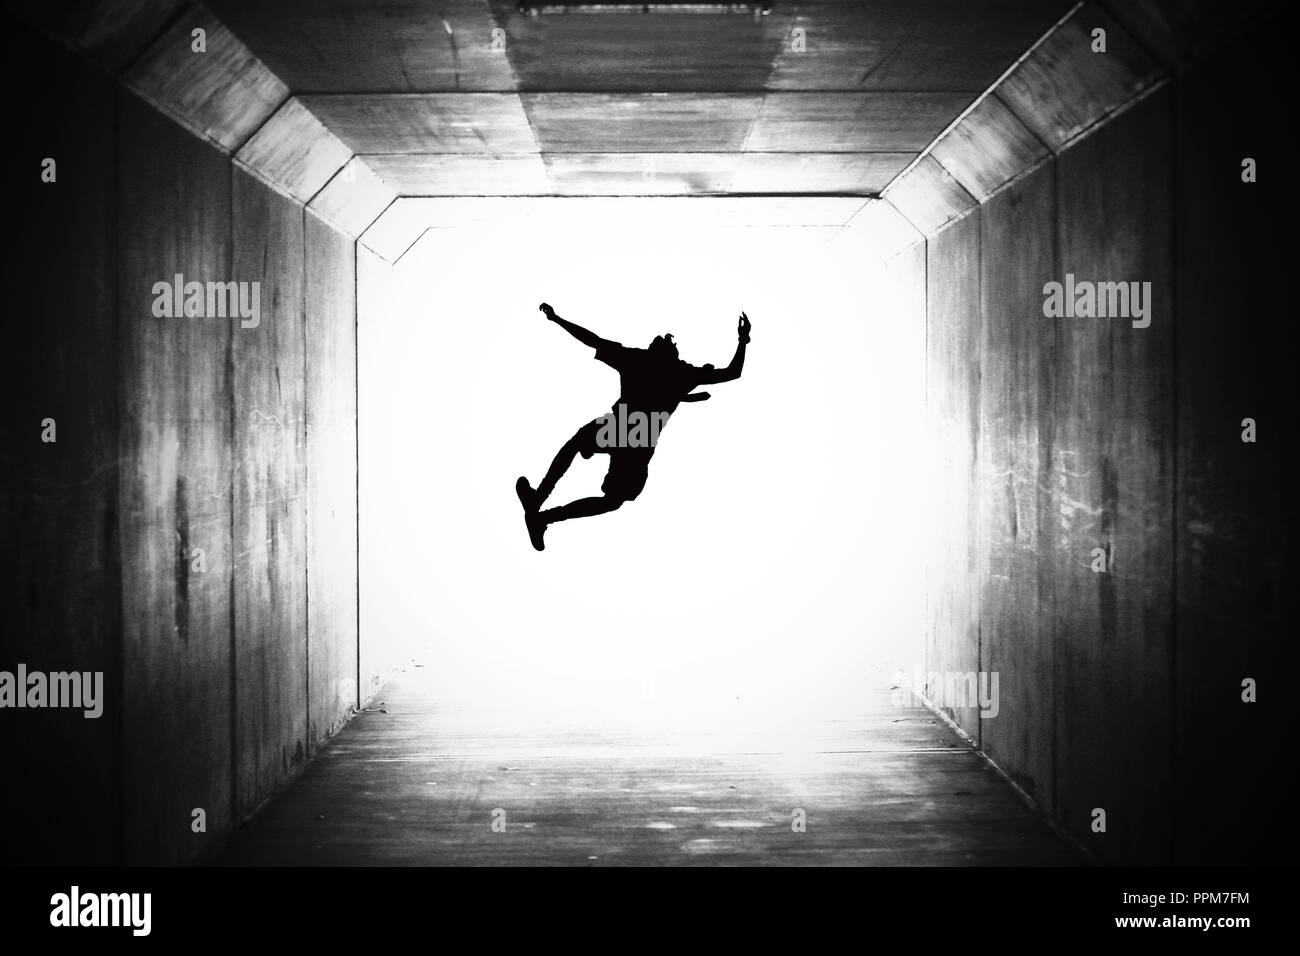 BW black and white image of a single school student silhouetted jumping up and clicking their heels in a tunnel. heading towards the light, graduation Stock Photo